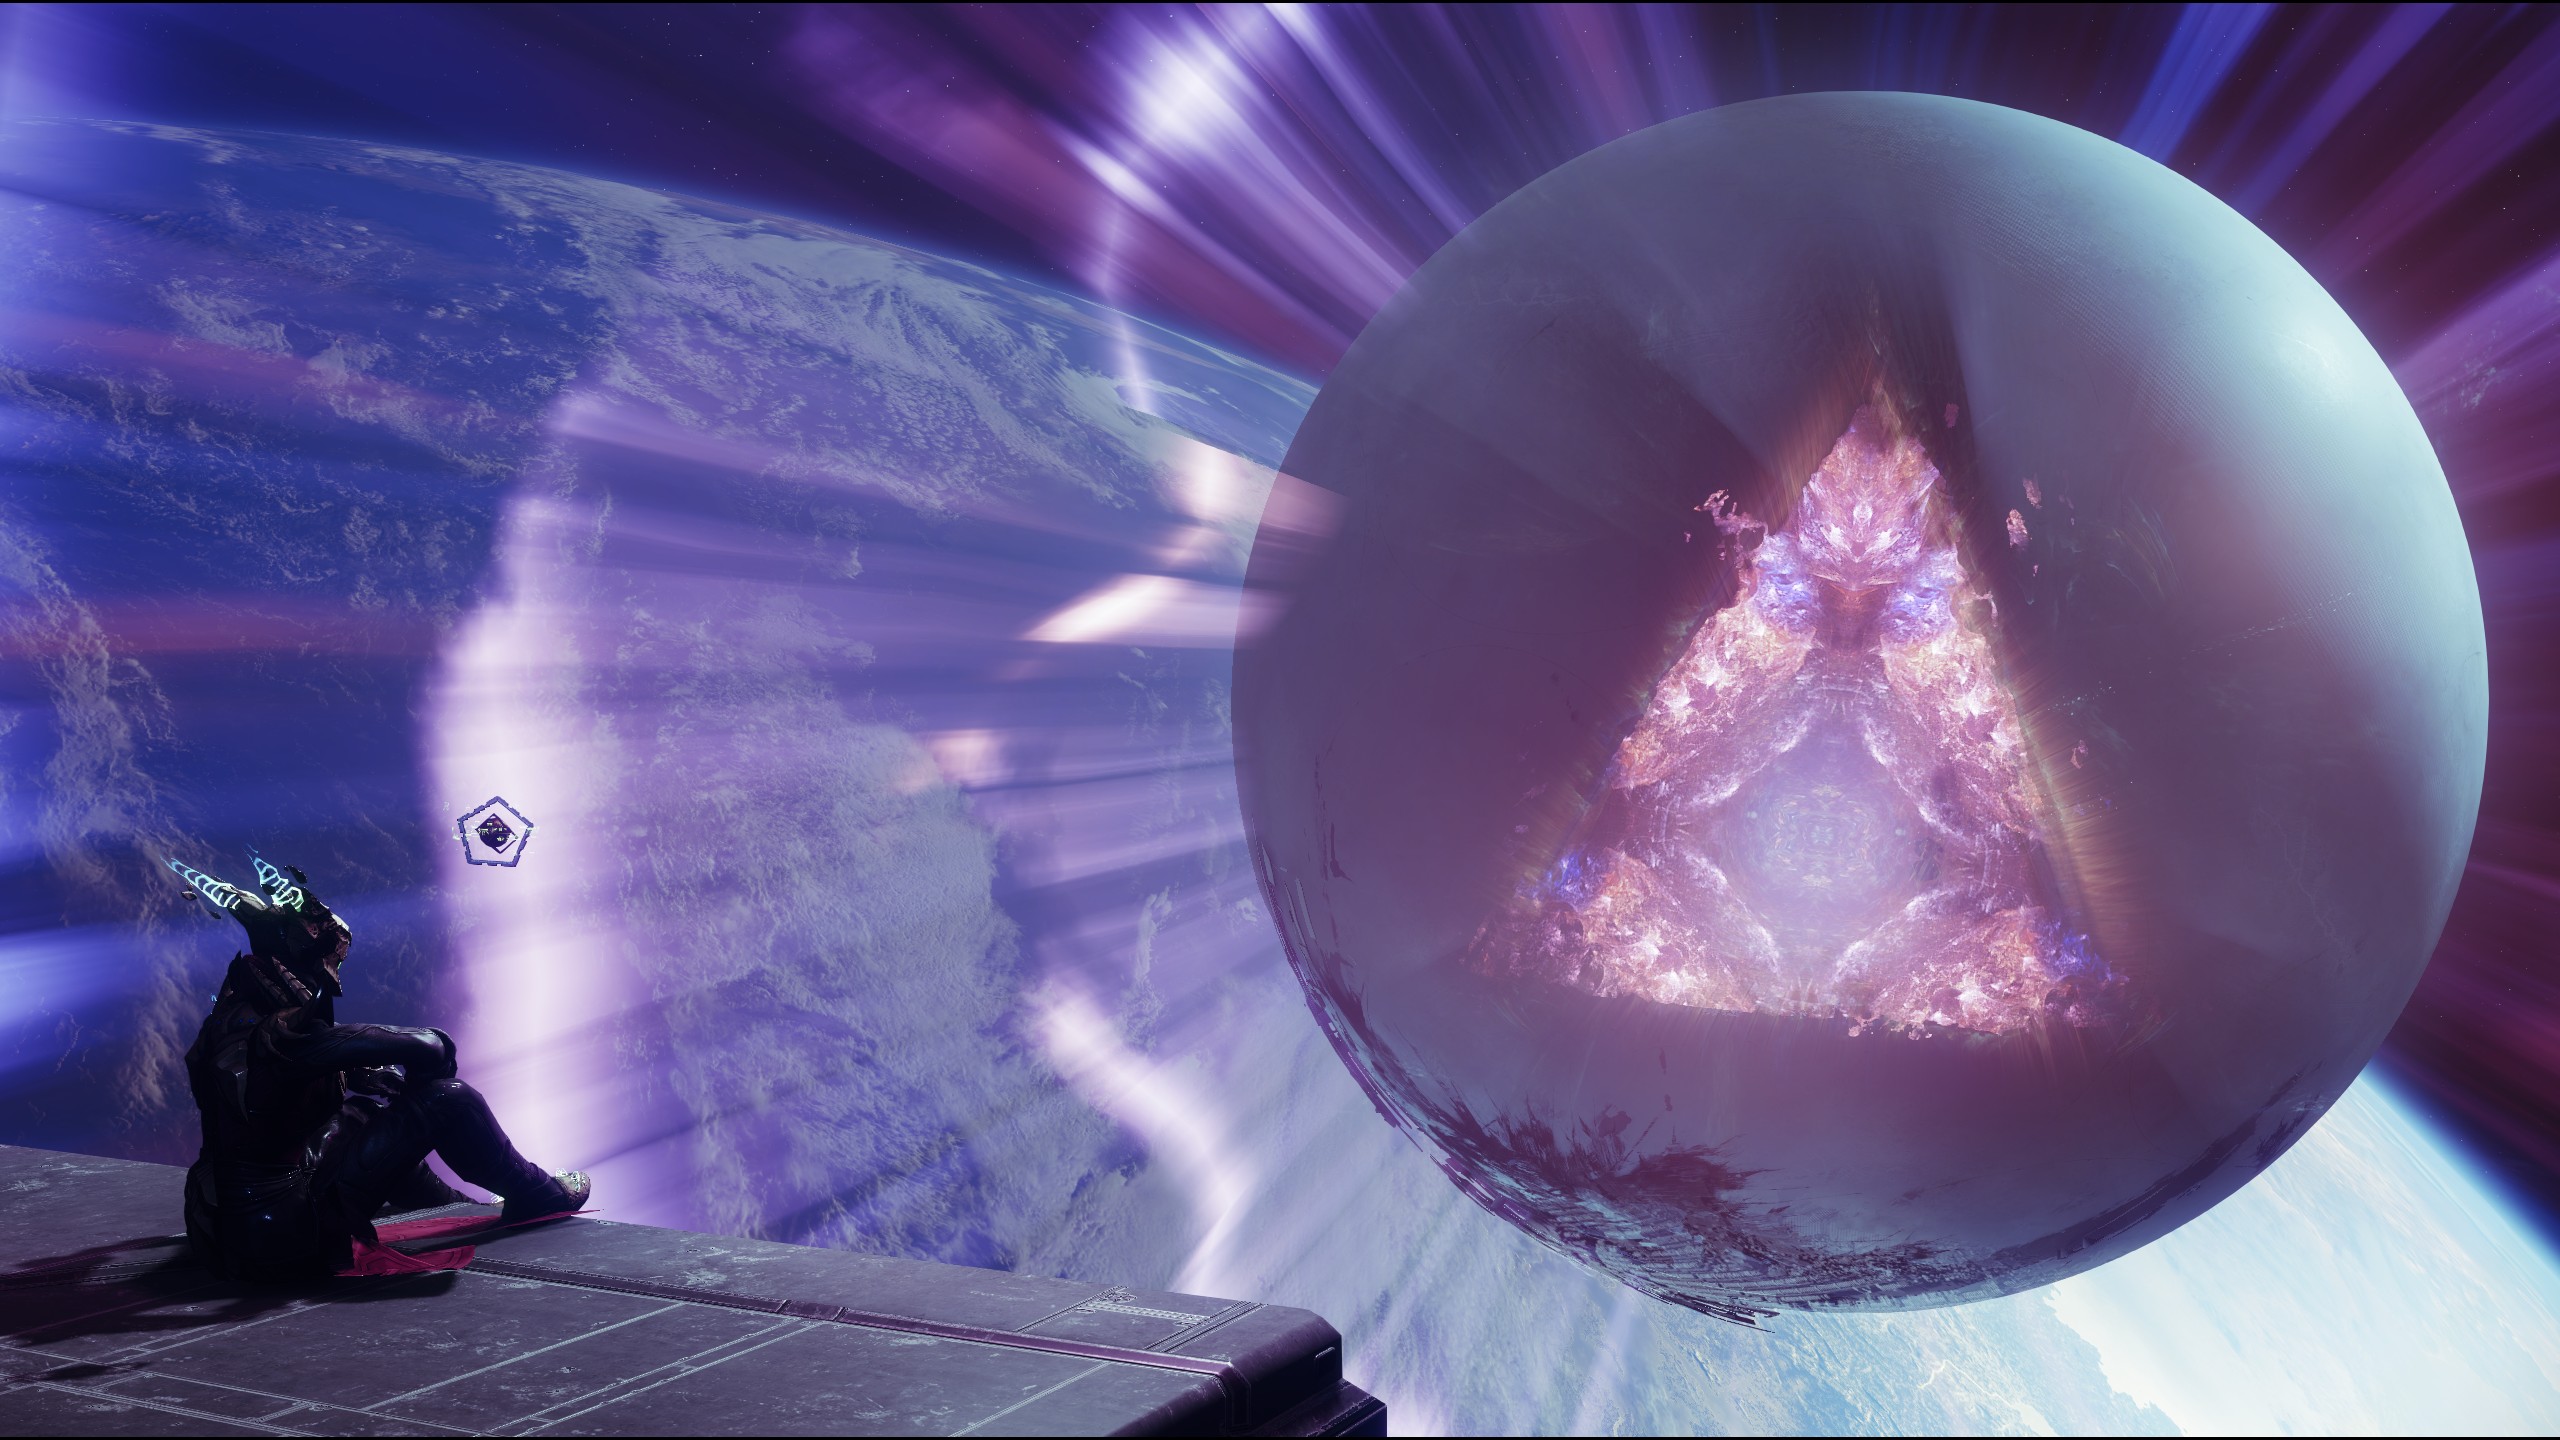  Destiny's decade-long saga is over after world's first raid team takes 19 hours to down the final boss, unlocking a wild 12-person climax for everyone to play 